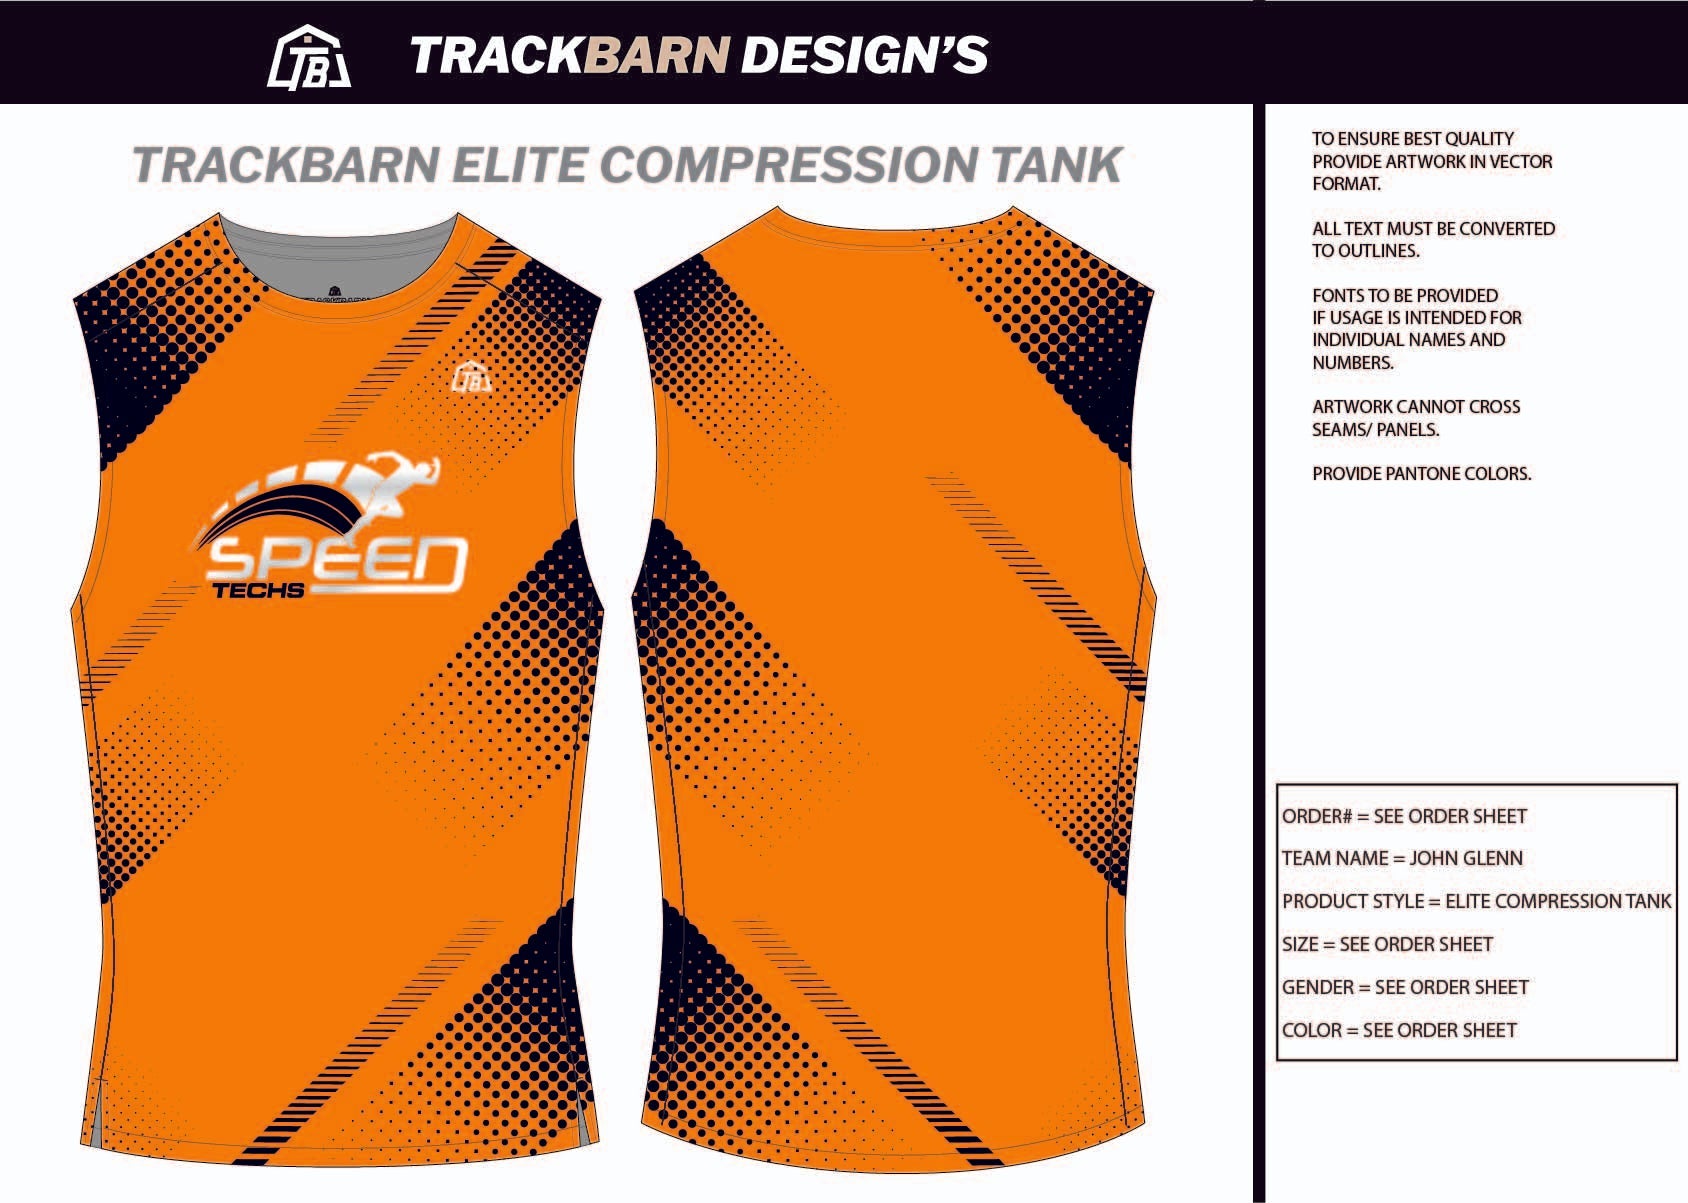 Speed-Techs- Mens Track Compression Tank